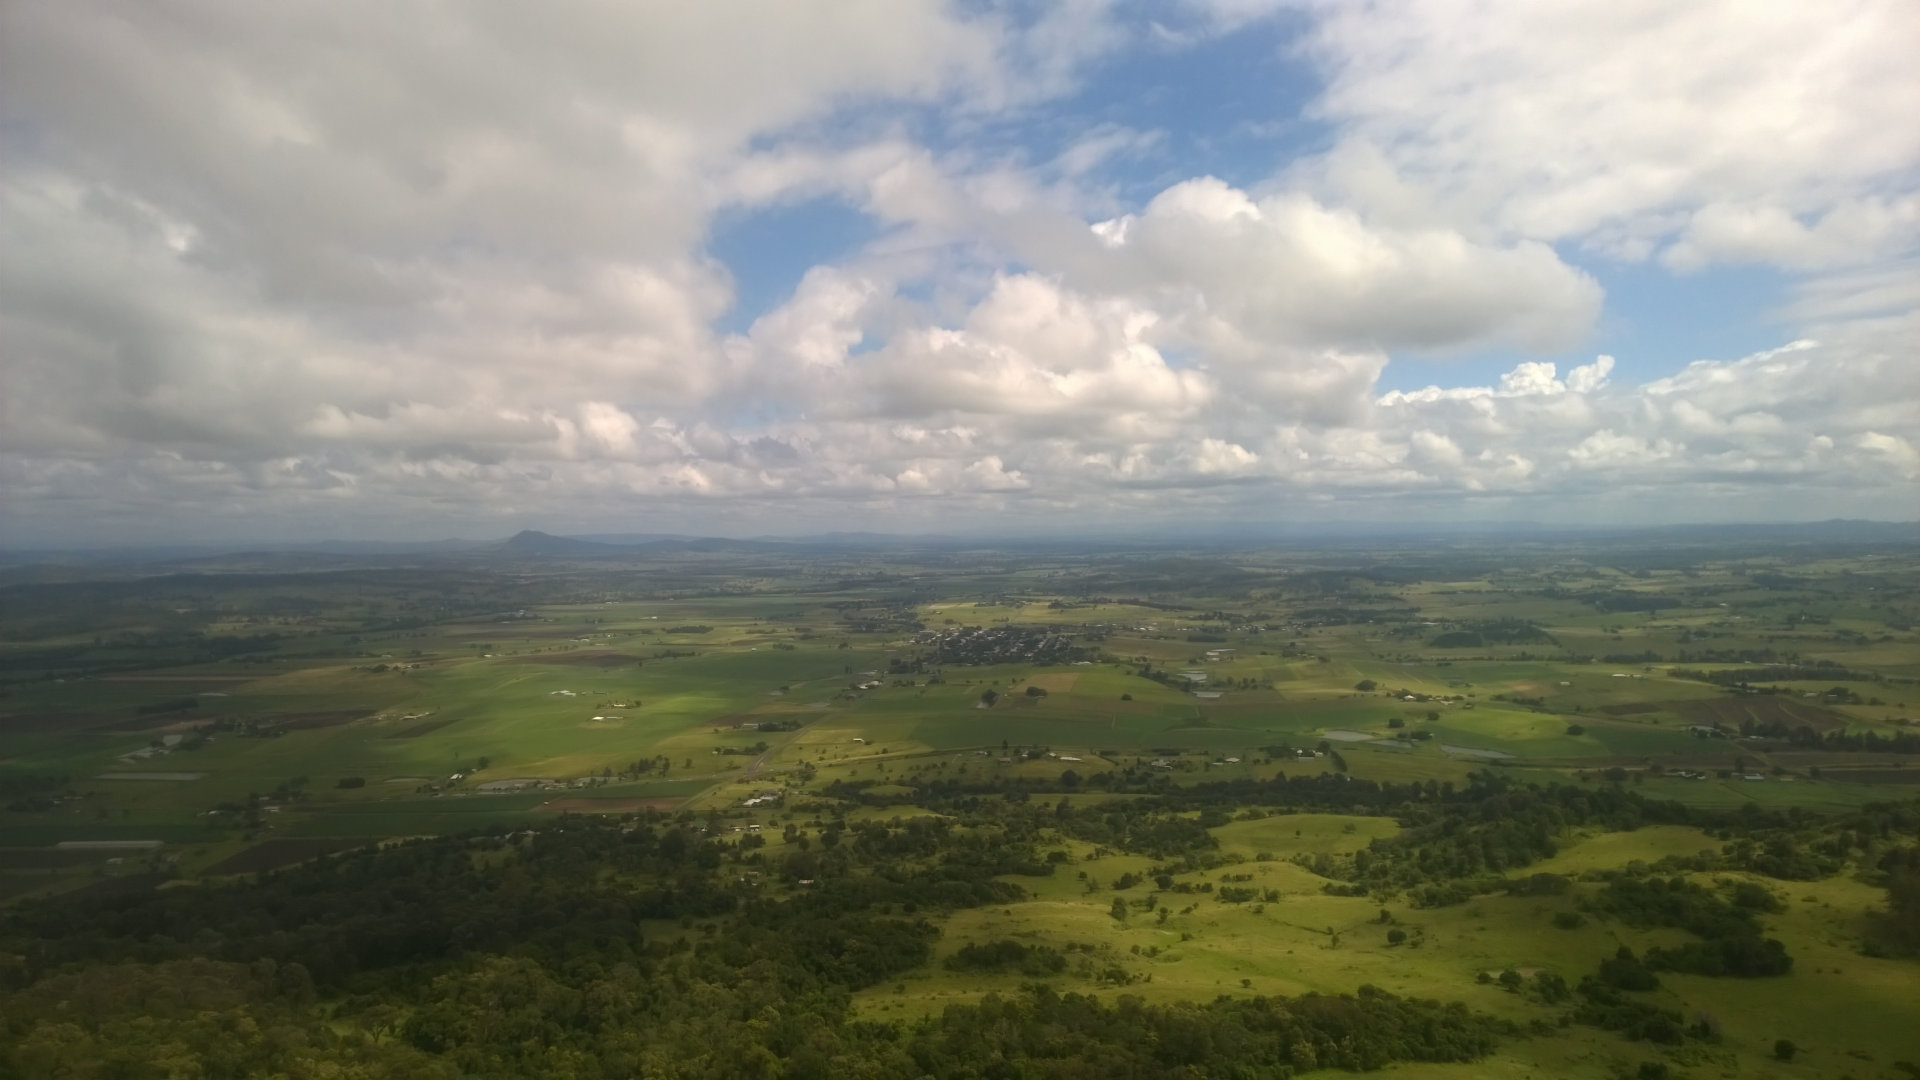 View over the Fassifern Valley from Logans Lookout at Mount French, a volcanic peak near Boonah, with two easy walks to Logans Lookout and Mee-bor-rum Circuit with views on the eastern side